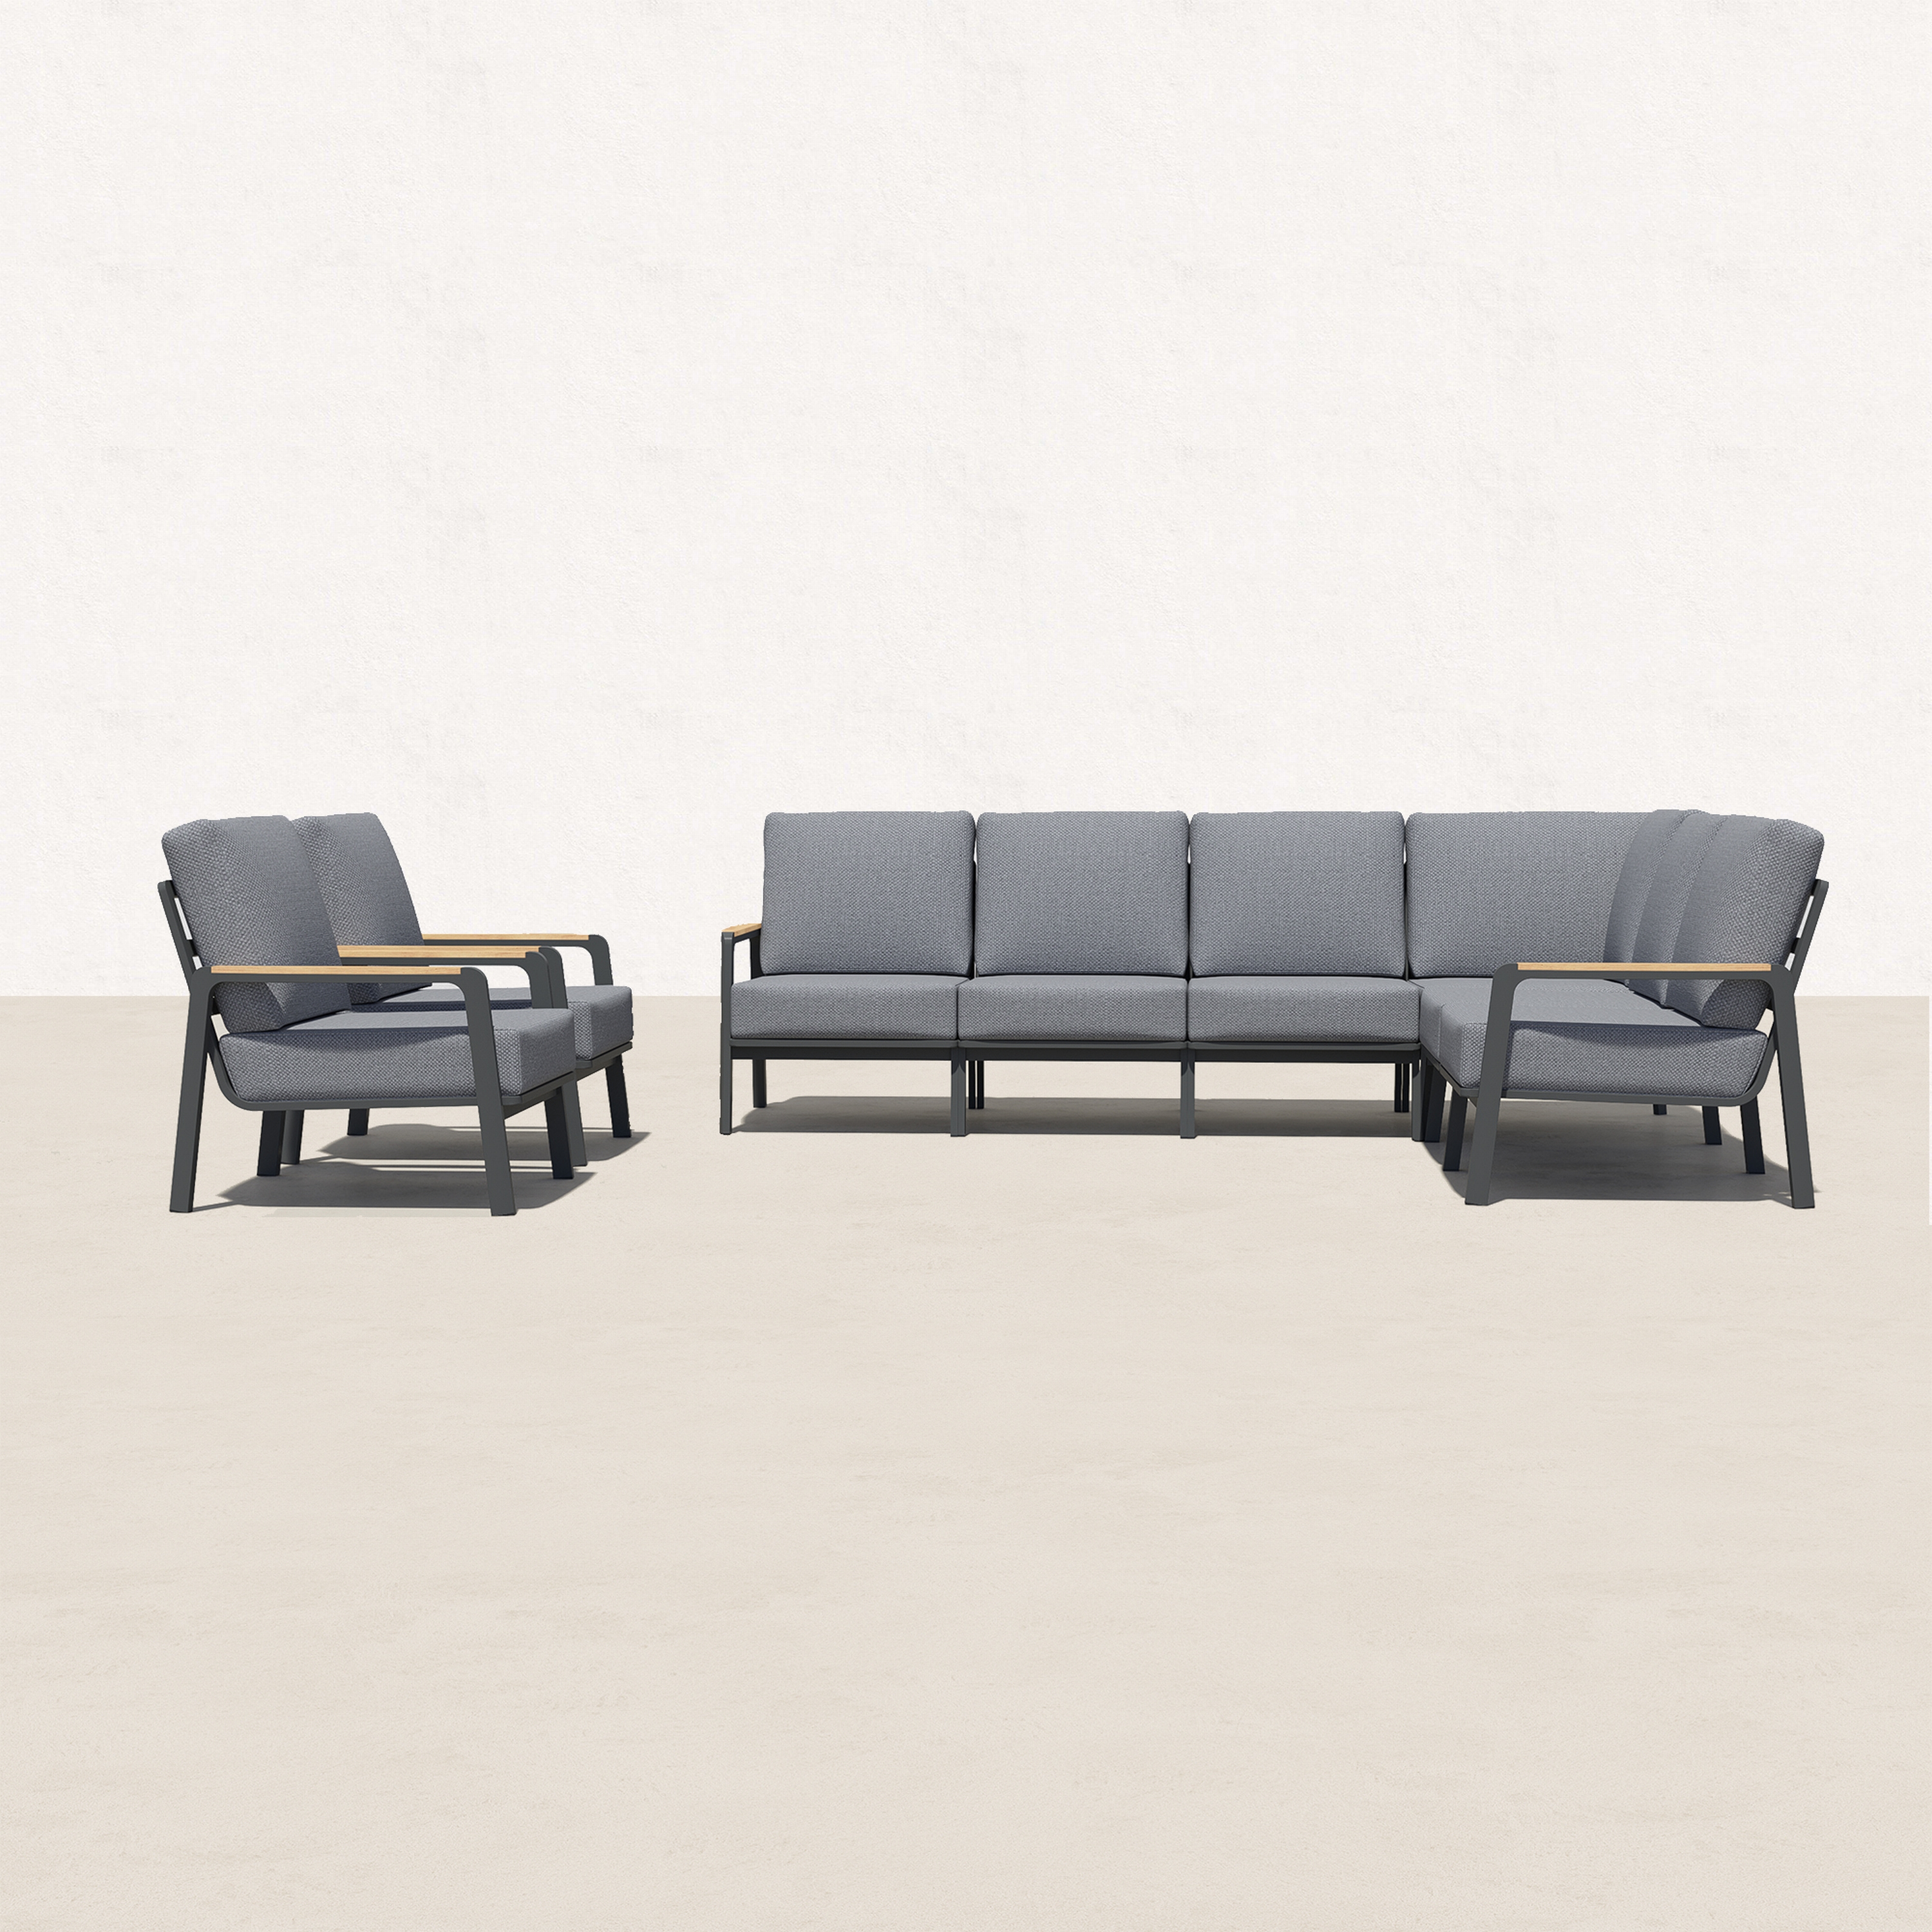 Orion Teak Outdoor L Sectional with Armchairs - 8 Seat